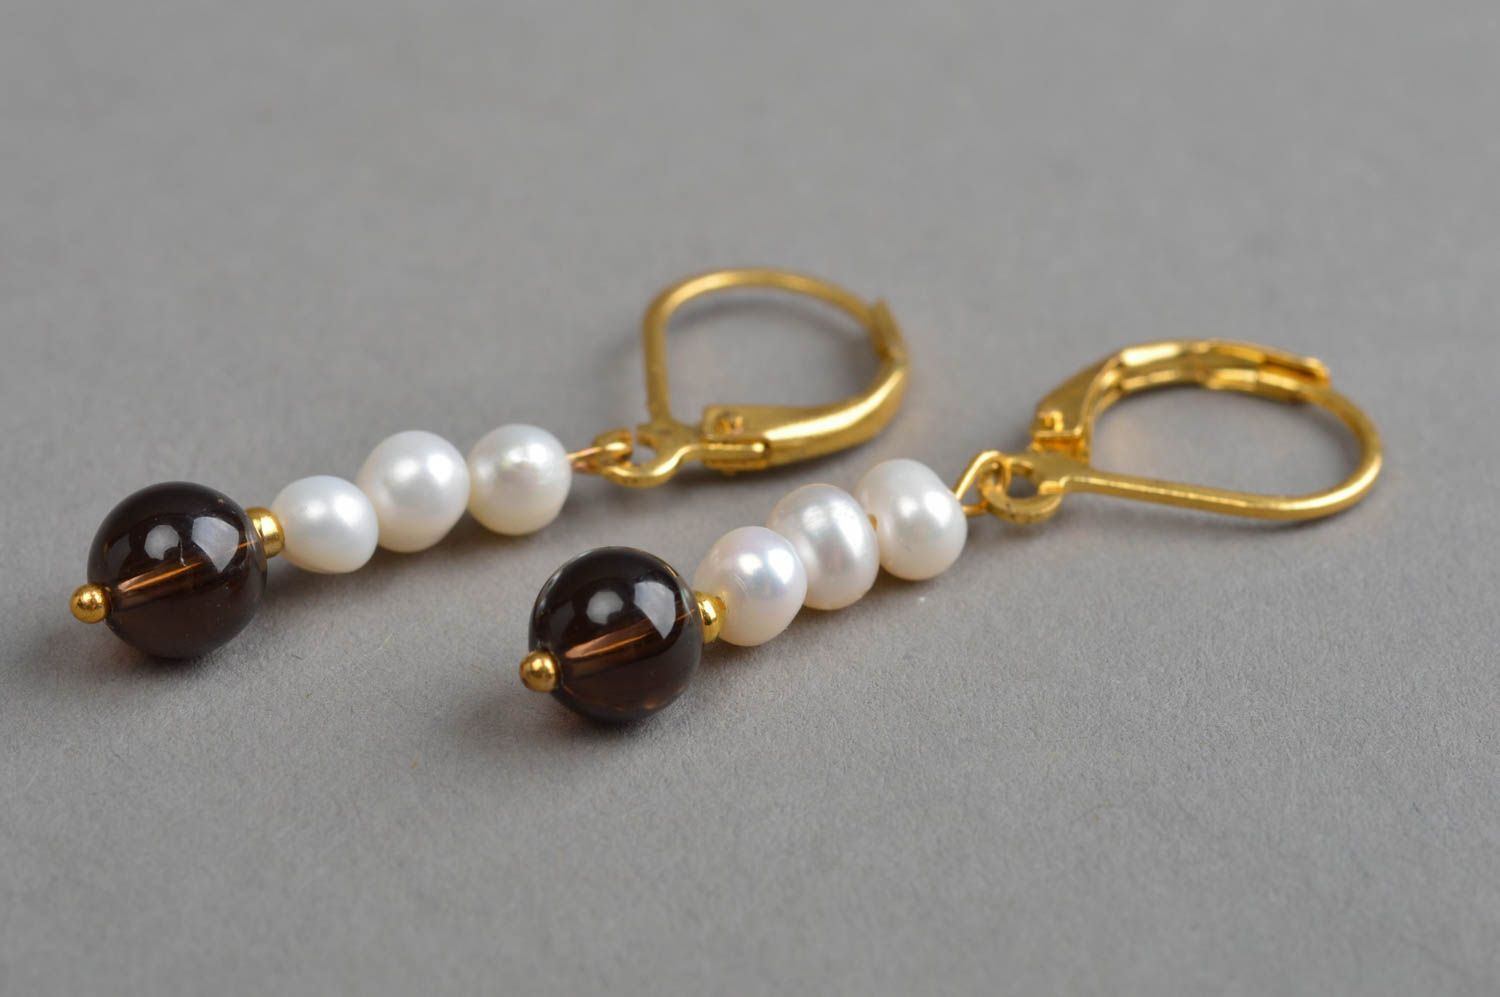 Handmade quartz earrings accessory with river pearls unusual stylish jewelry photo 3